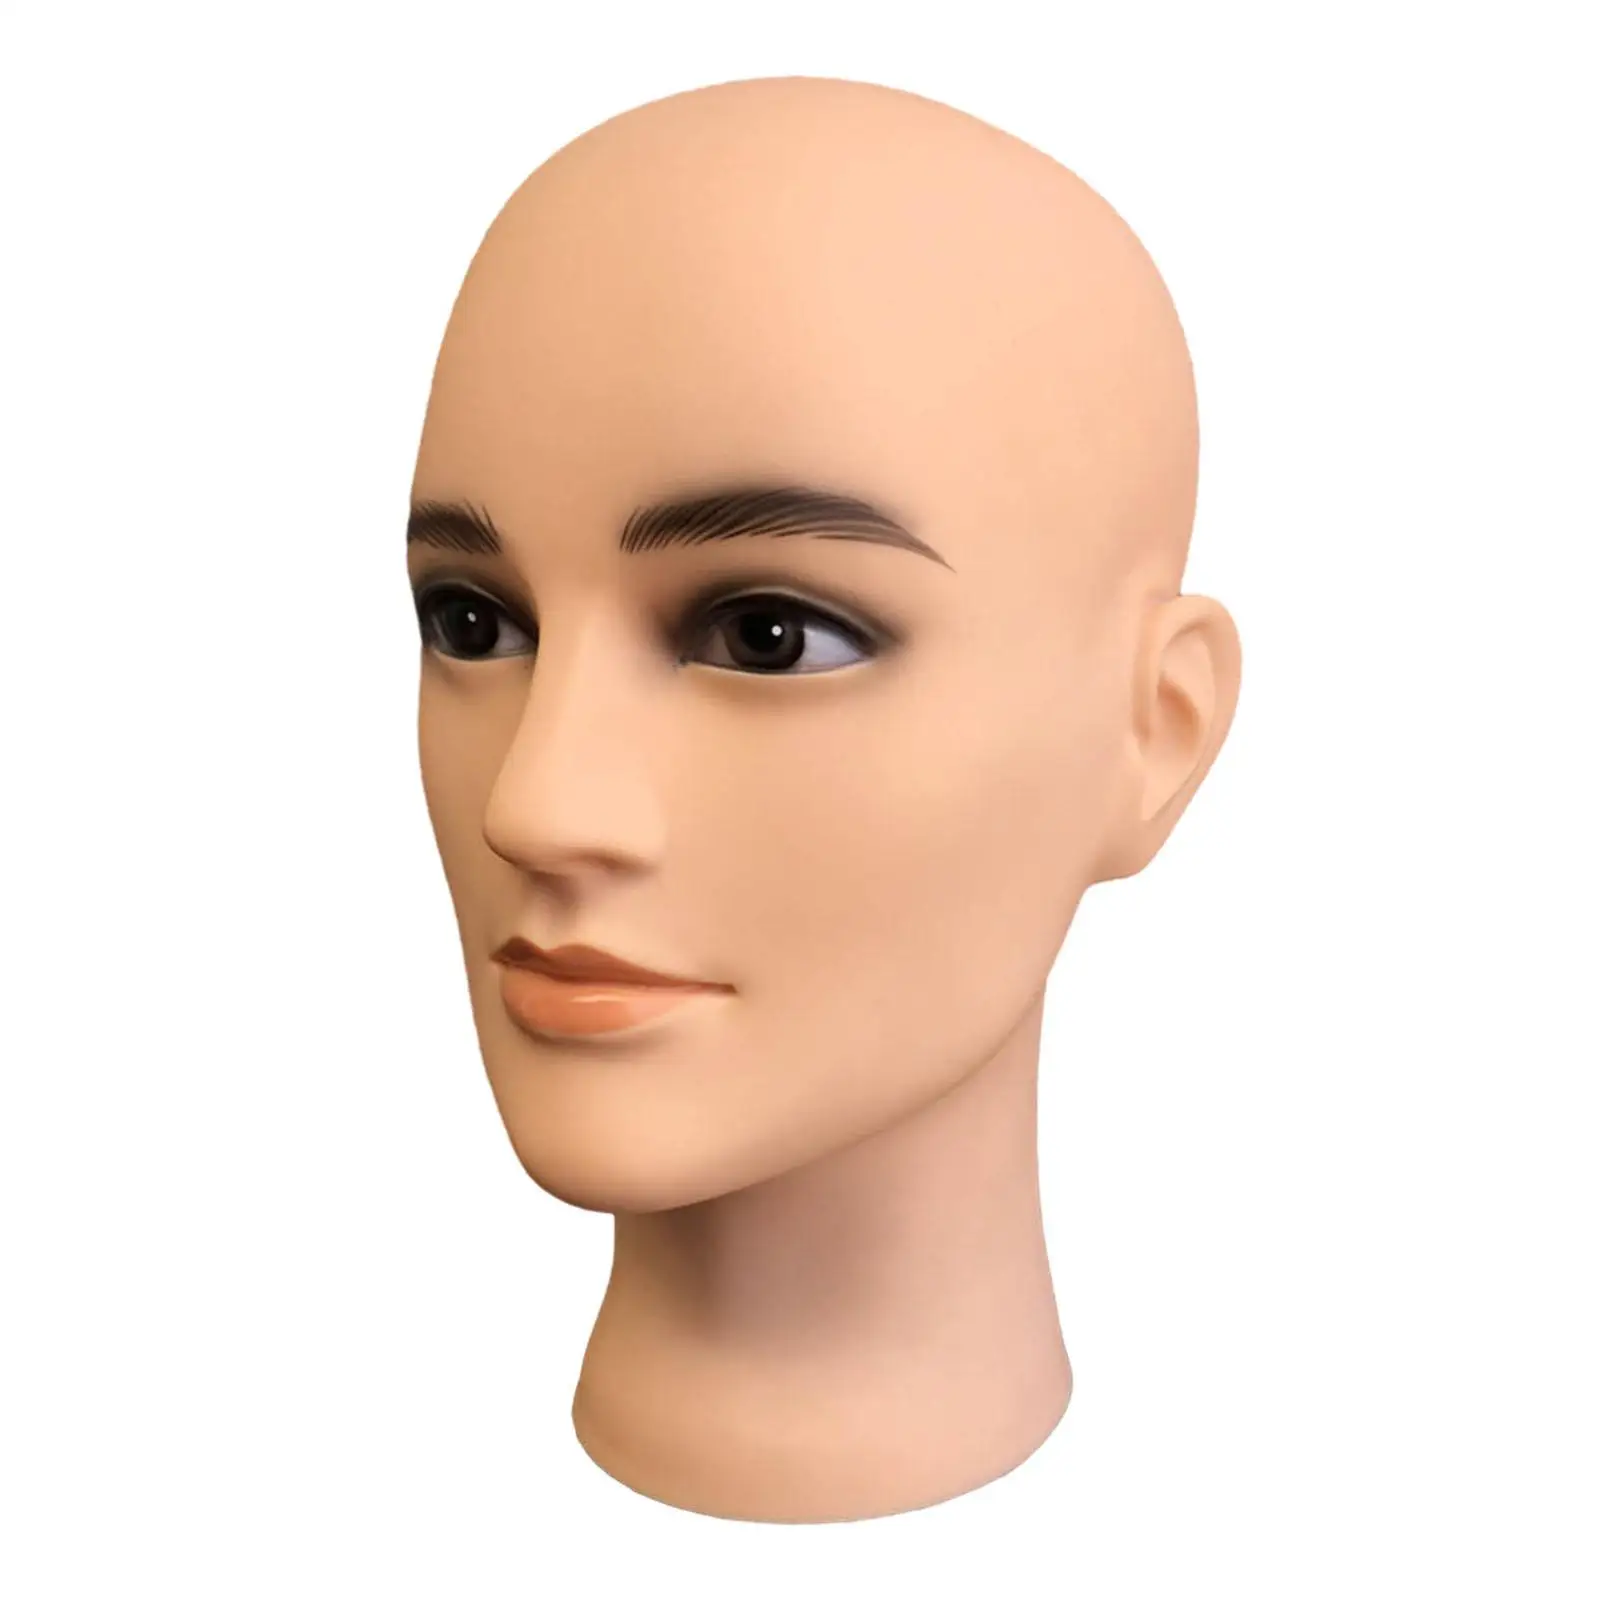 Professional Cosmetology Head Multipurpose PVC Male Mannequin Head for Necklace Glasses Caps Hats Wigs Displaying Making Styling